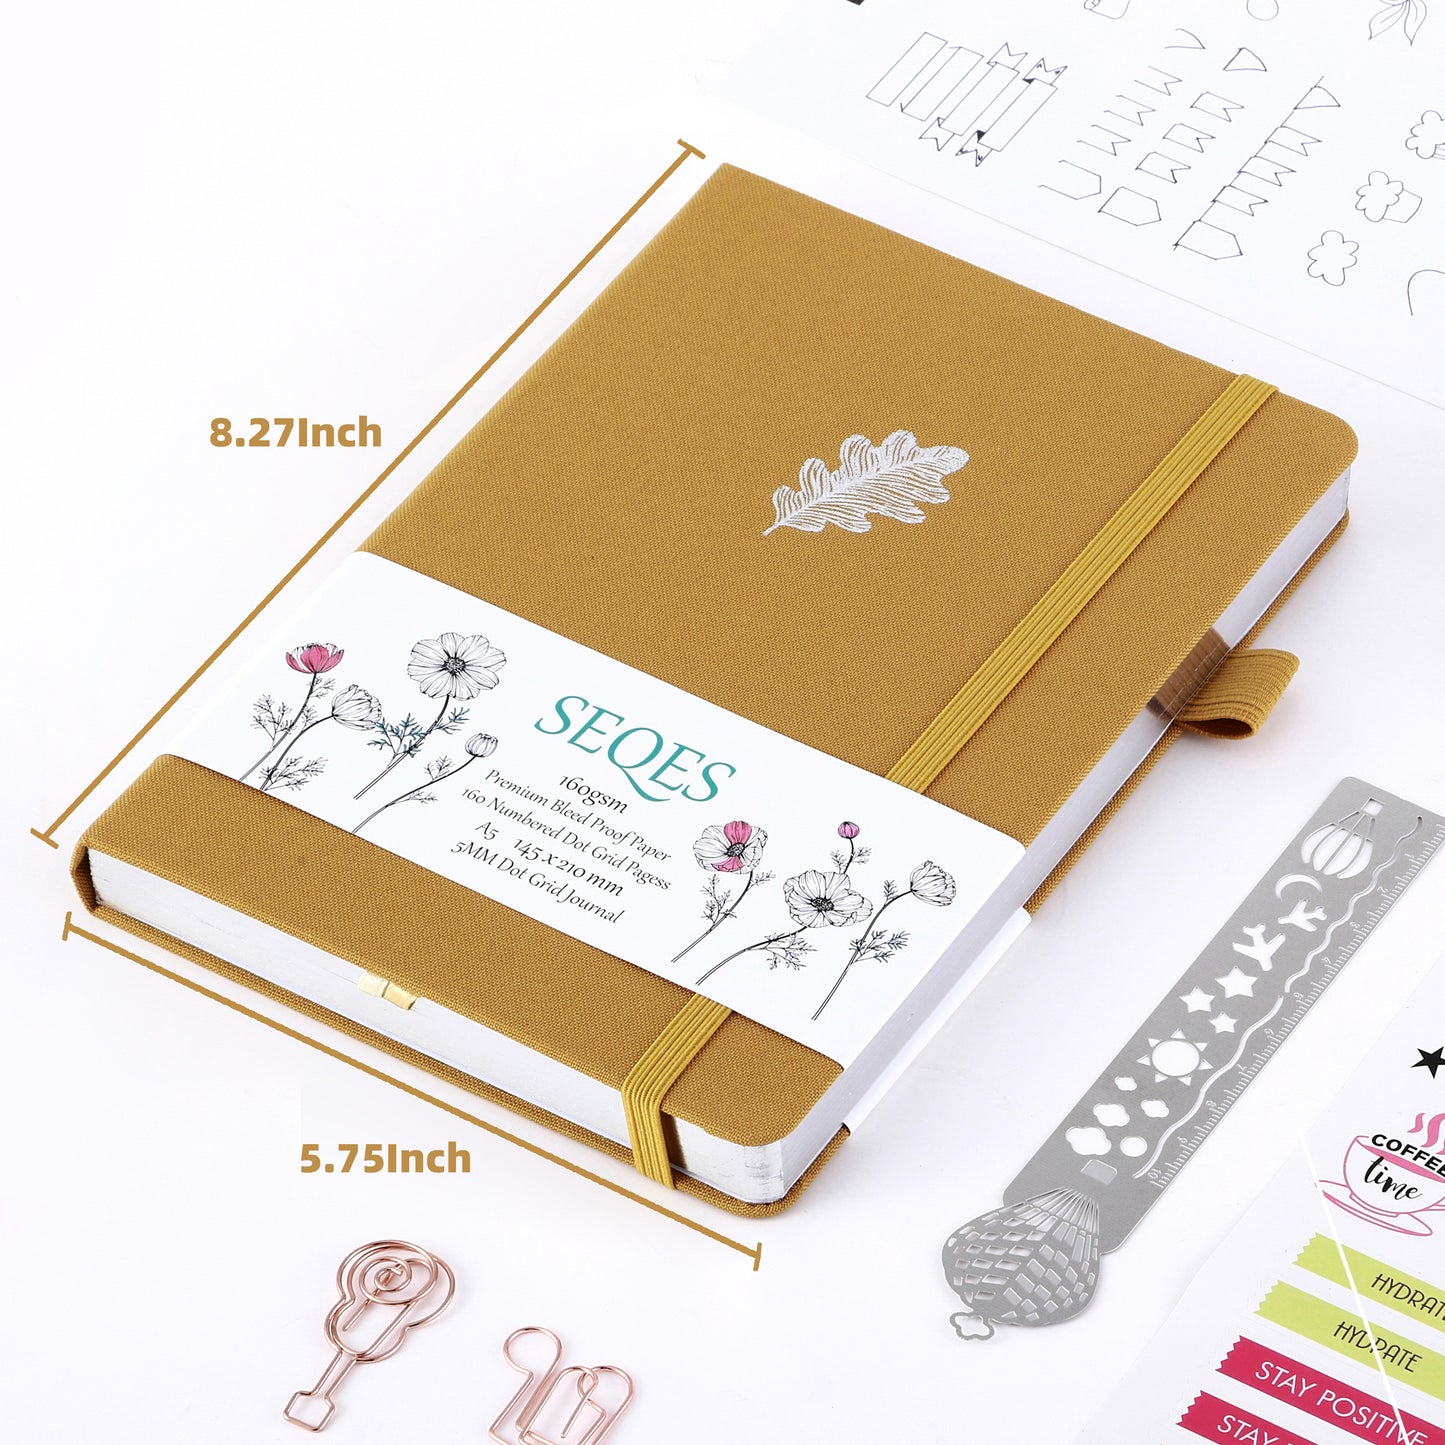 BULLET JOURNAL A5 160gsm PREMIUM PAPER SILVER EDGE -dragonfly